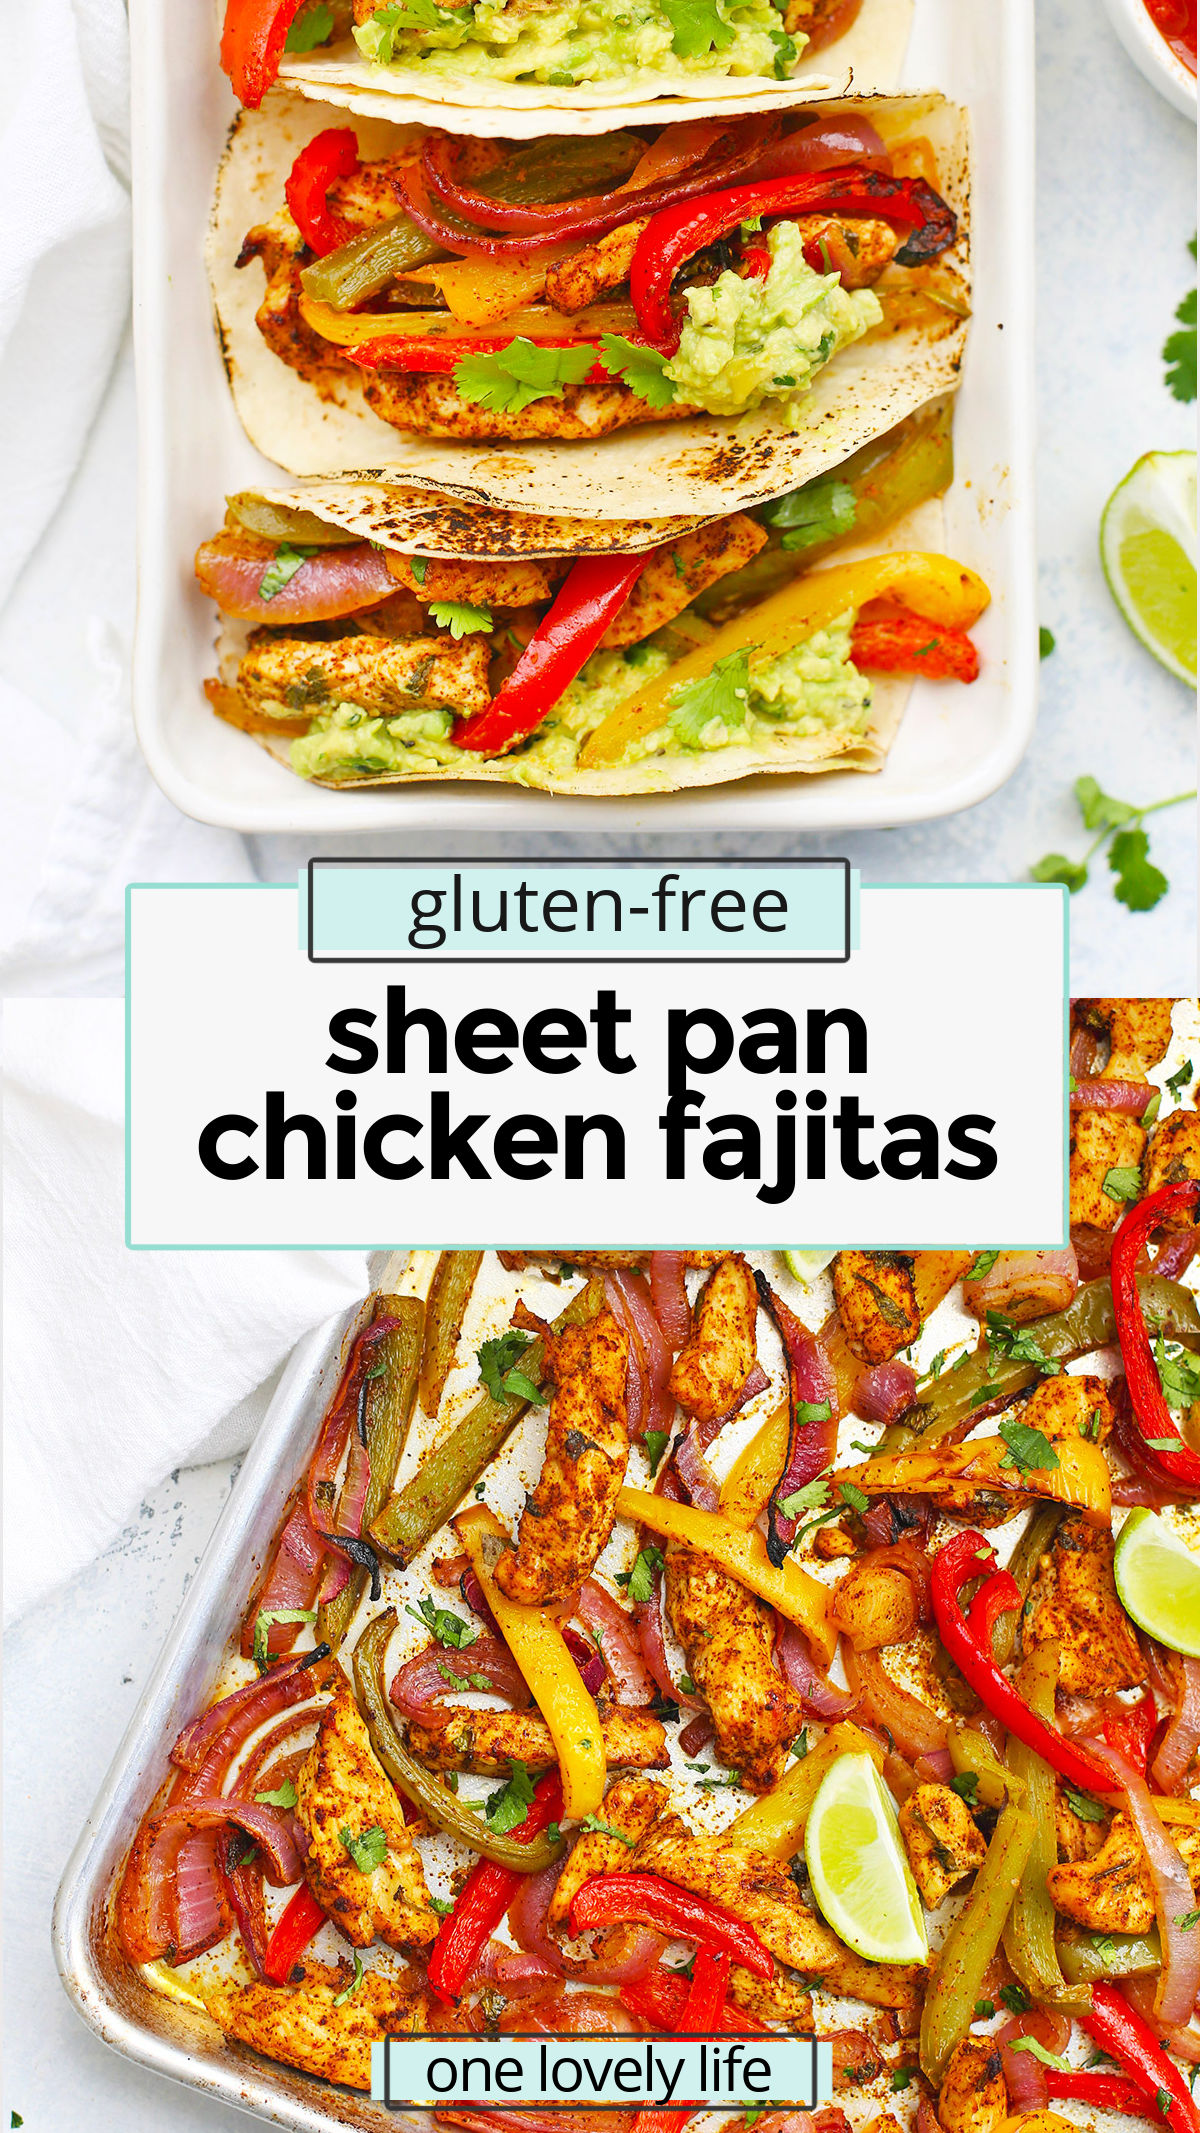 Sheet Pan Chicken Fajitas - This easy one-pan dinner is a family favorite! A flavorful seasoning mix + a rainbow of veggies make this sheet pan dinner delicious! (Gluten-Free, Dairy-Free) // Healthy One Pan Dinner // Sheet Pan Fajitas Recipe // gluten free sheet pan dinner // gluten free chicken fajitas // gluten free sheet pan fajita recipe // easy gluten free dinner // easy dinners //